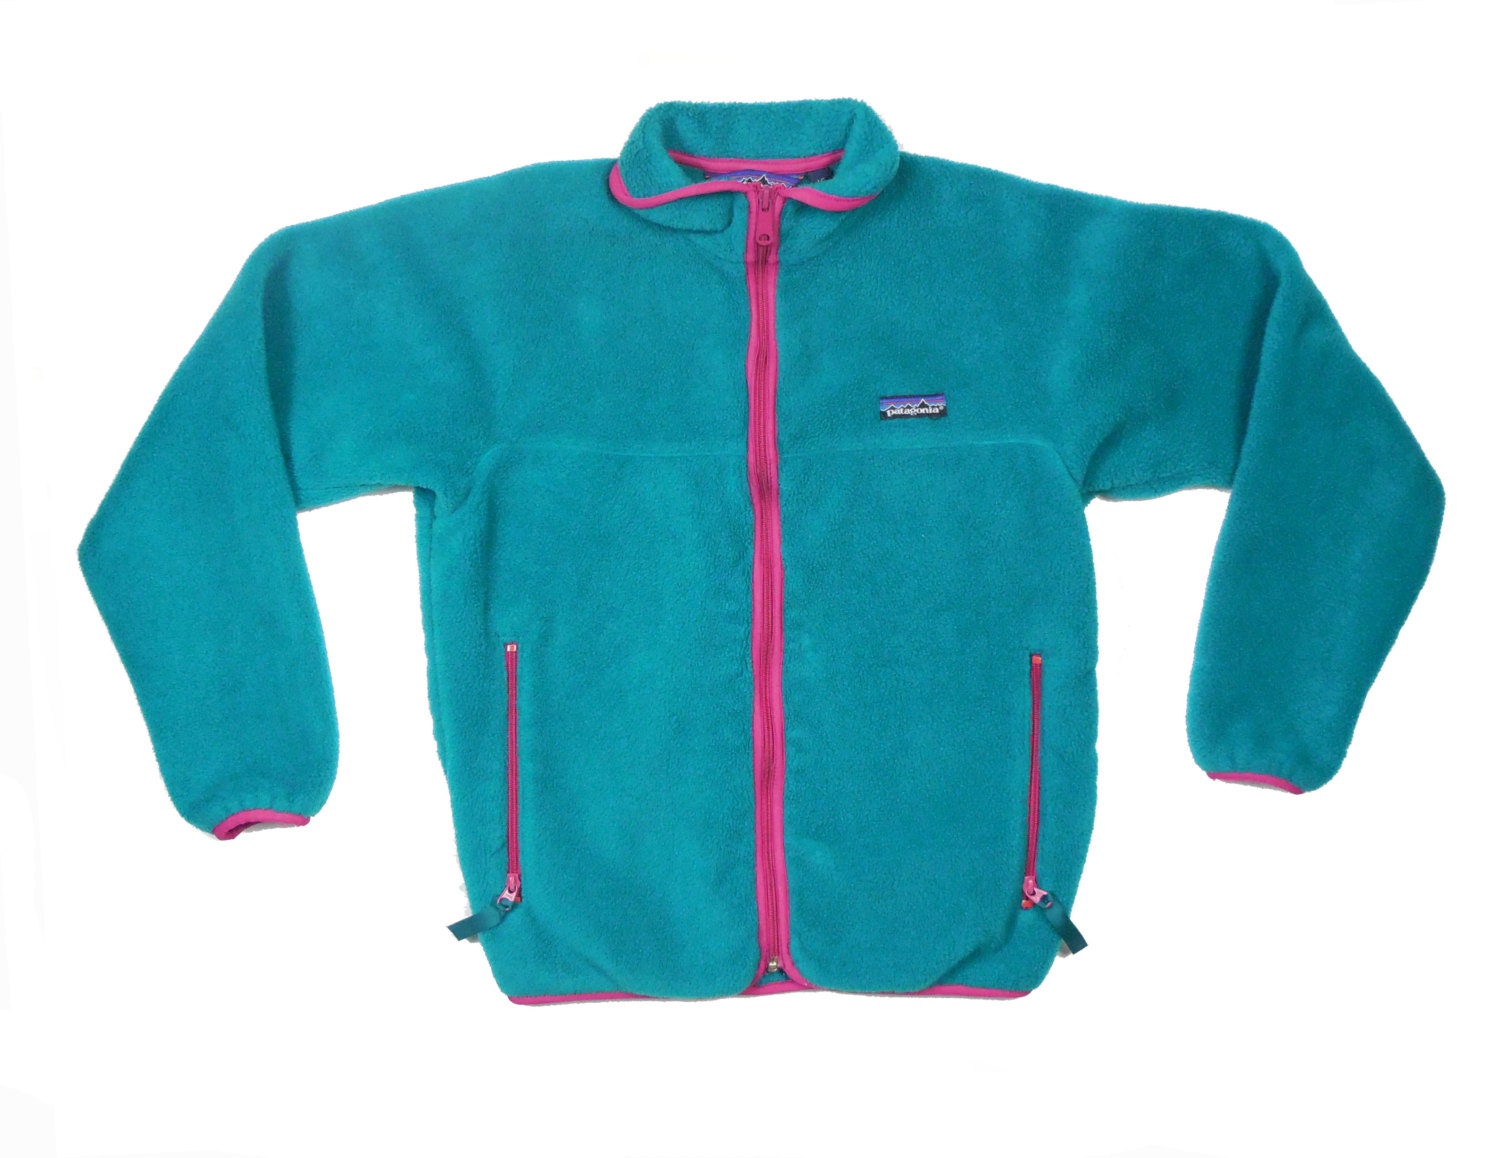 Popular items for patagonia fleece on Etsy